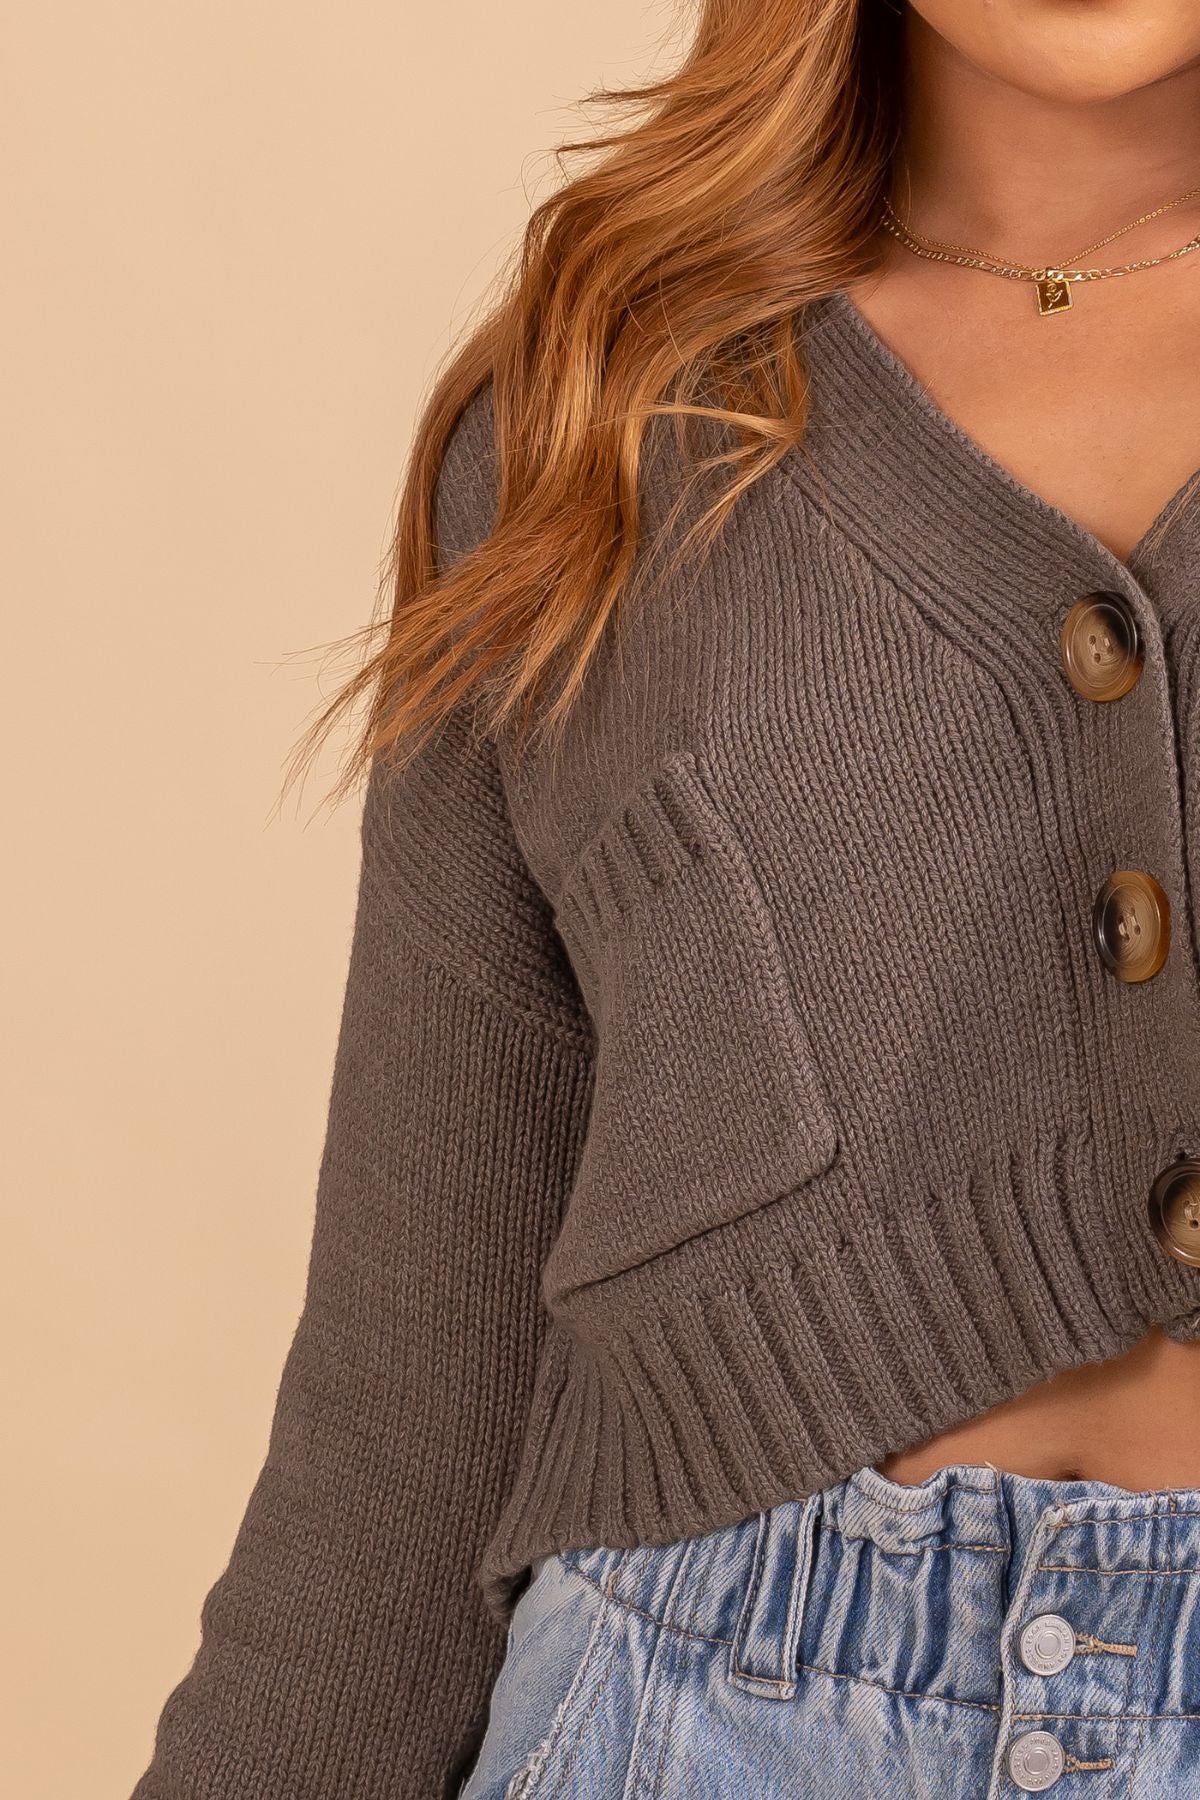 3 button up gray cardigan